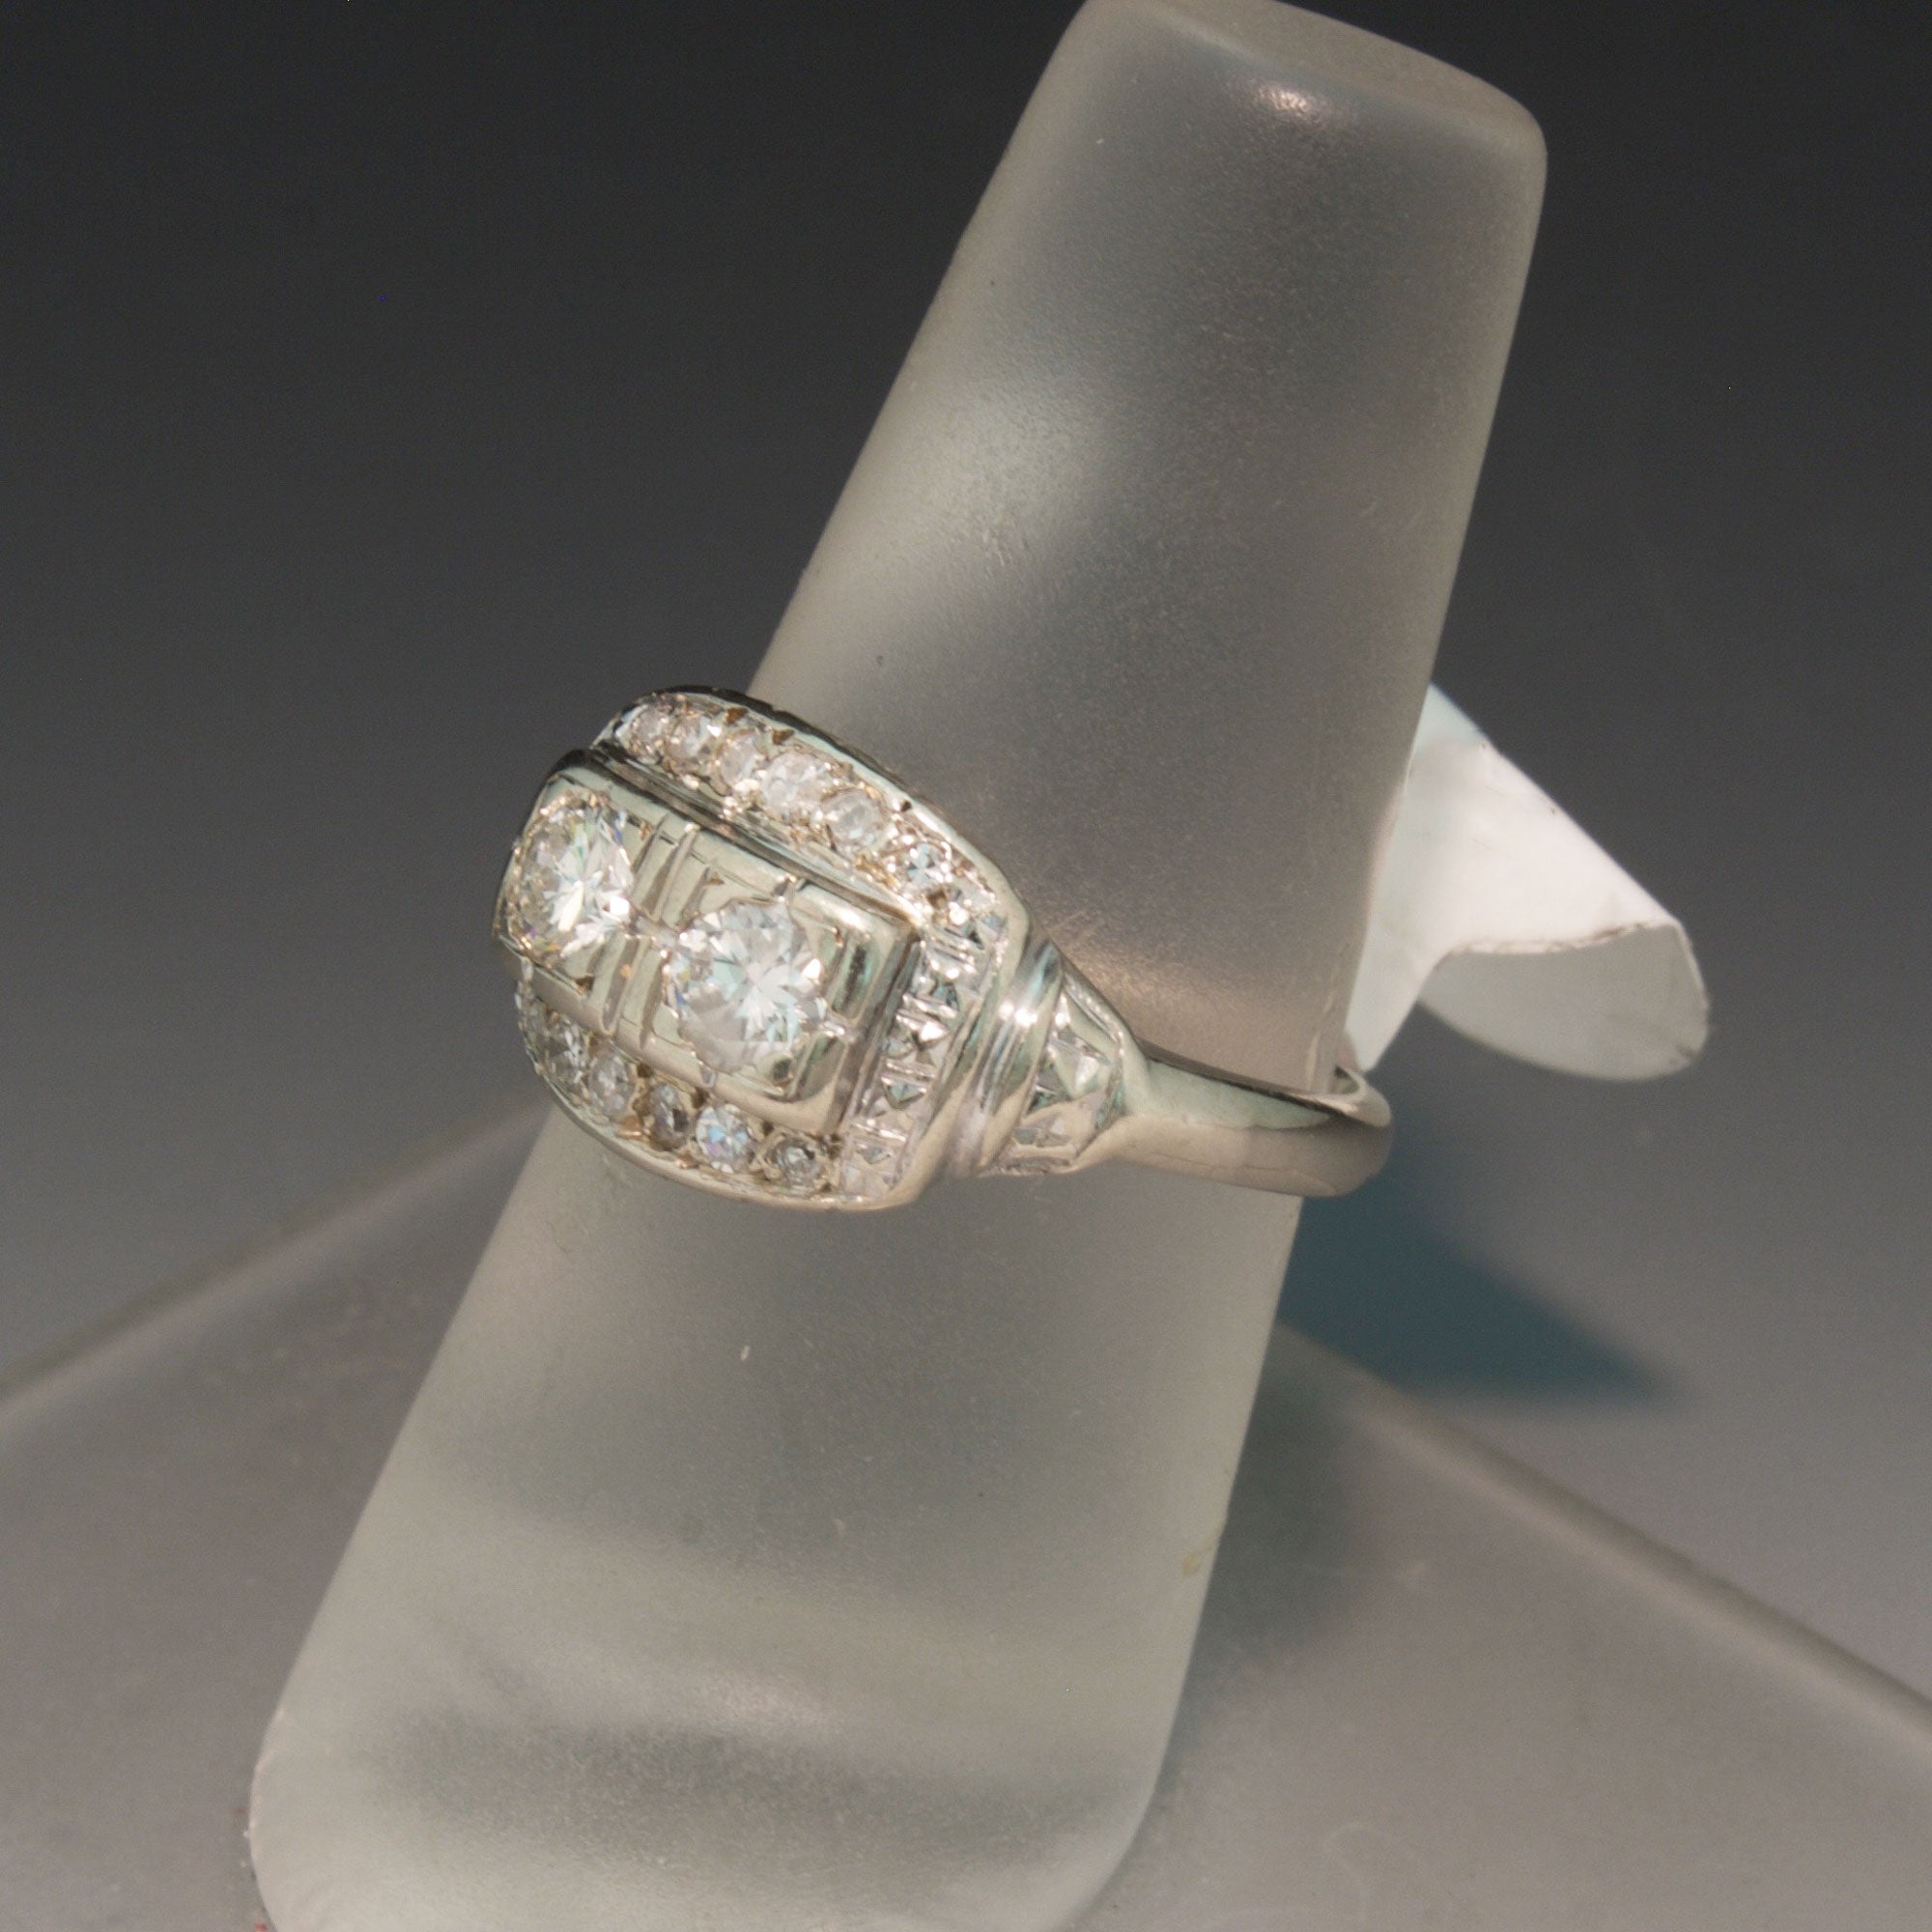 1930s Round Domed Diamond Ring | Exquisite Jewelry for Every Occasion | FWCJ